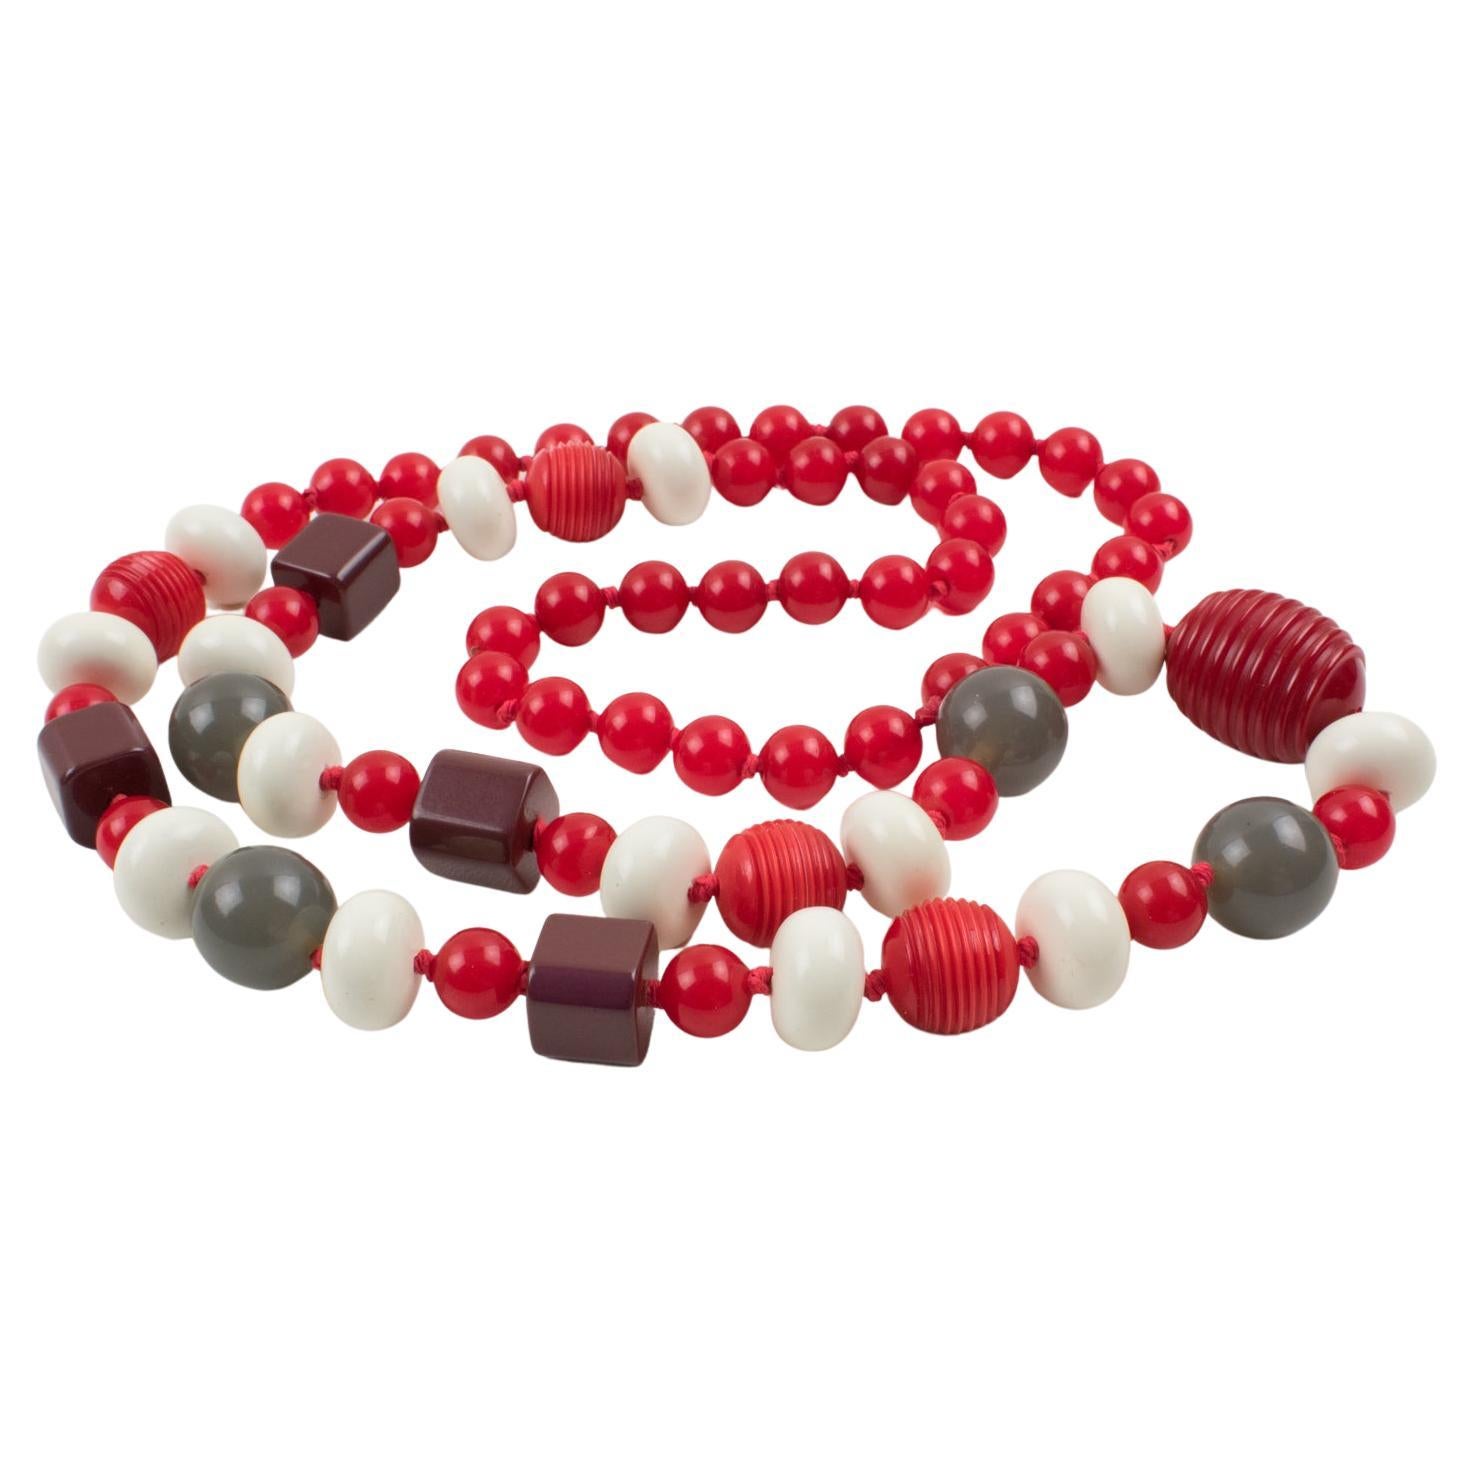 Bakelite and Lucite Long Necklace Gray, White, and Red Colors